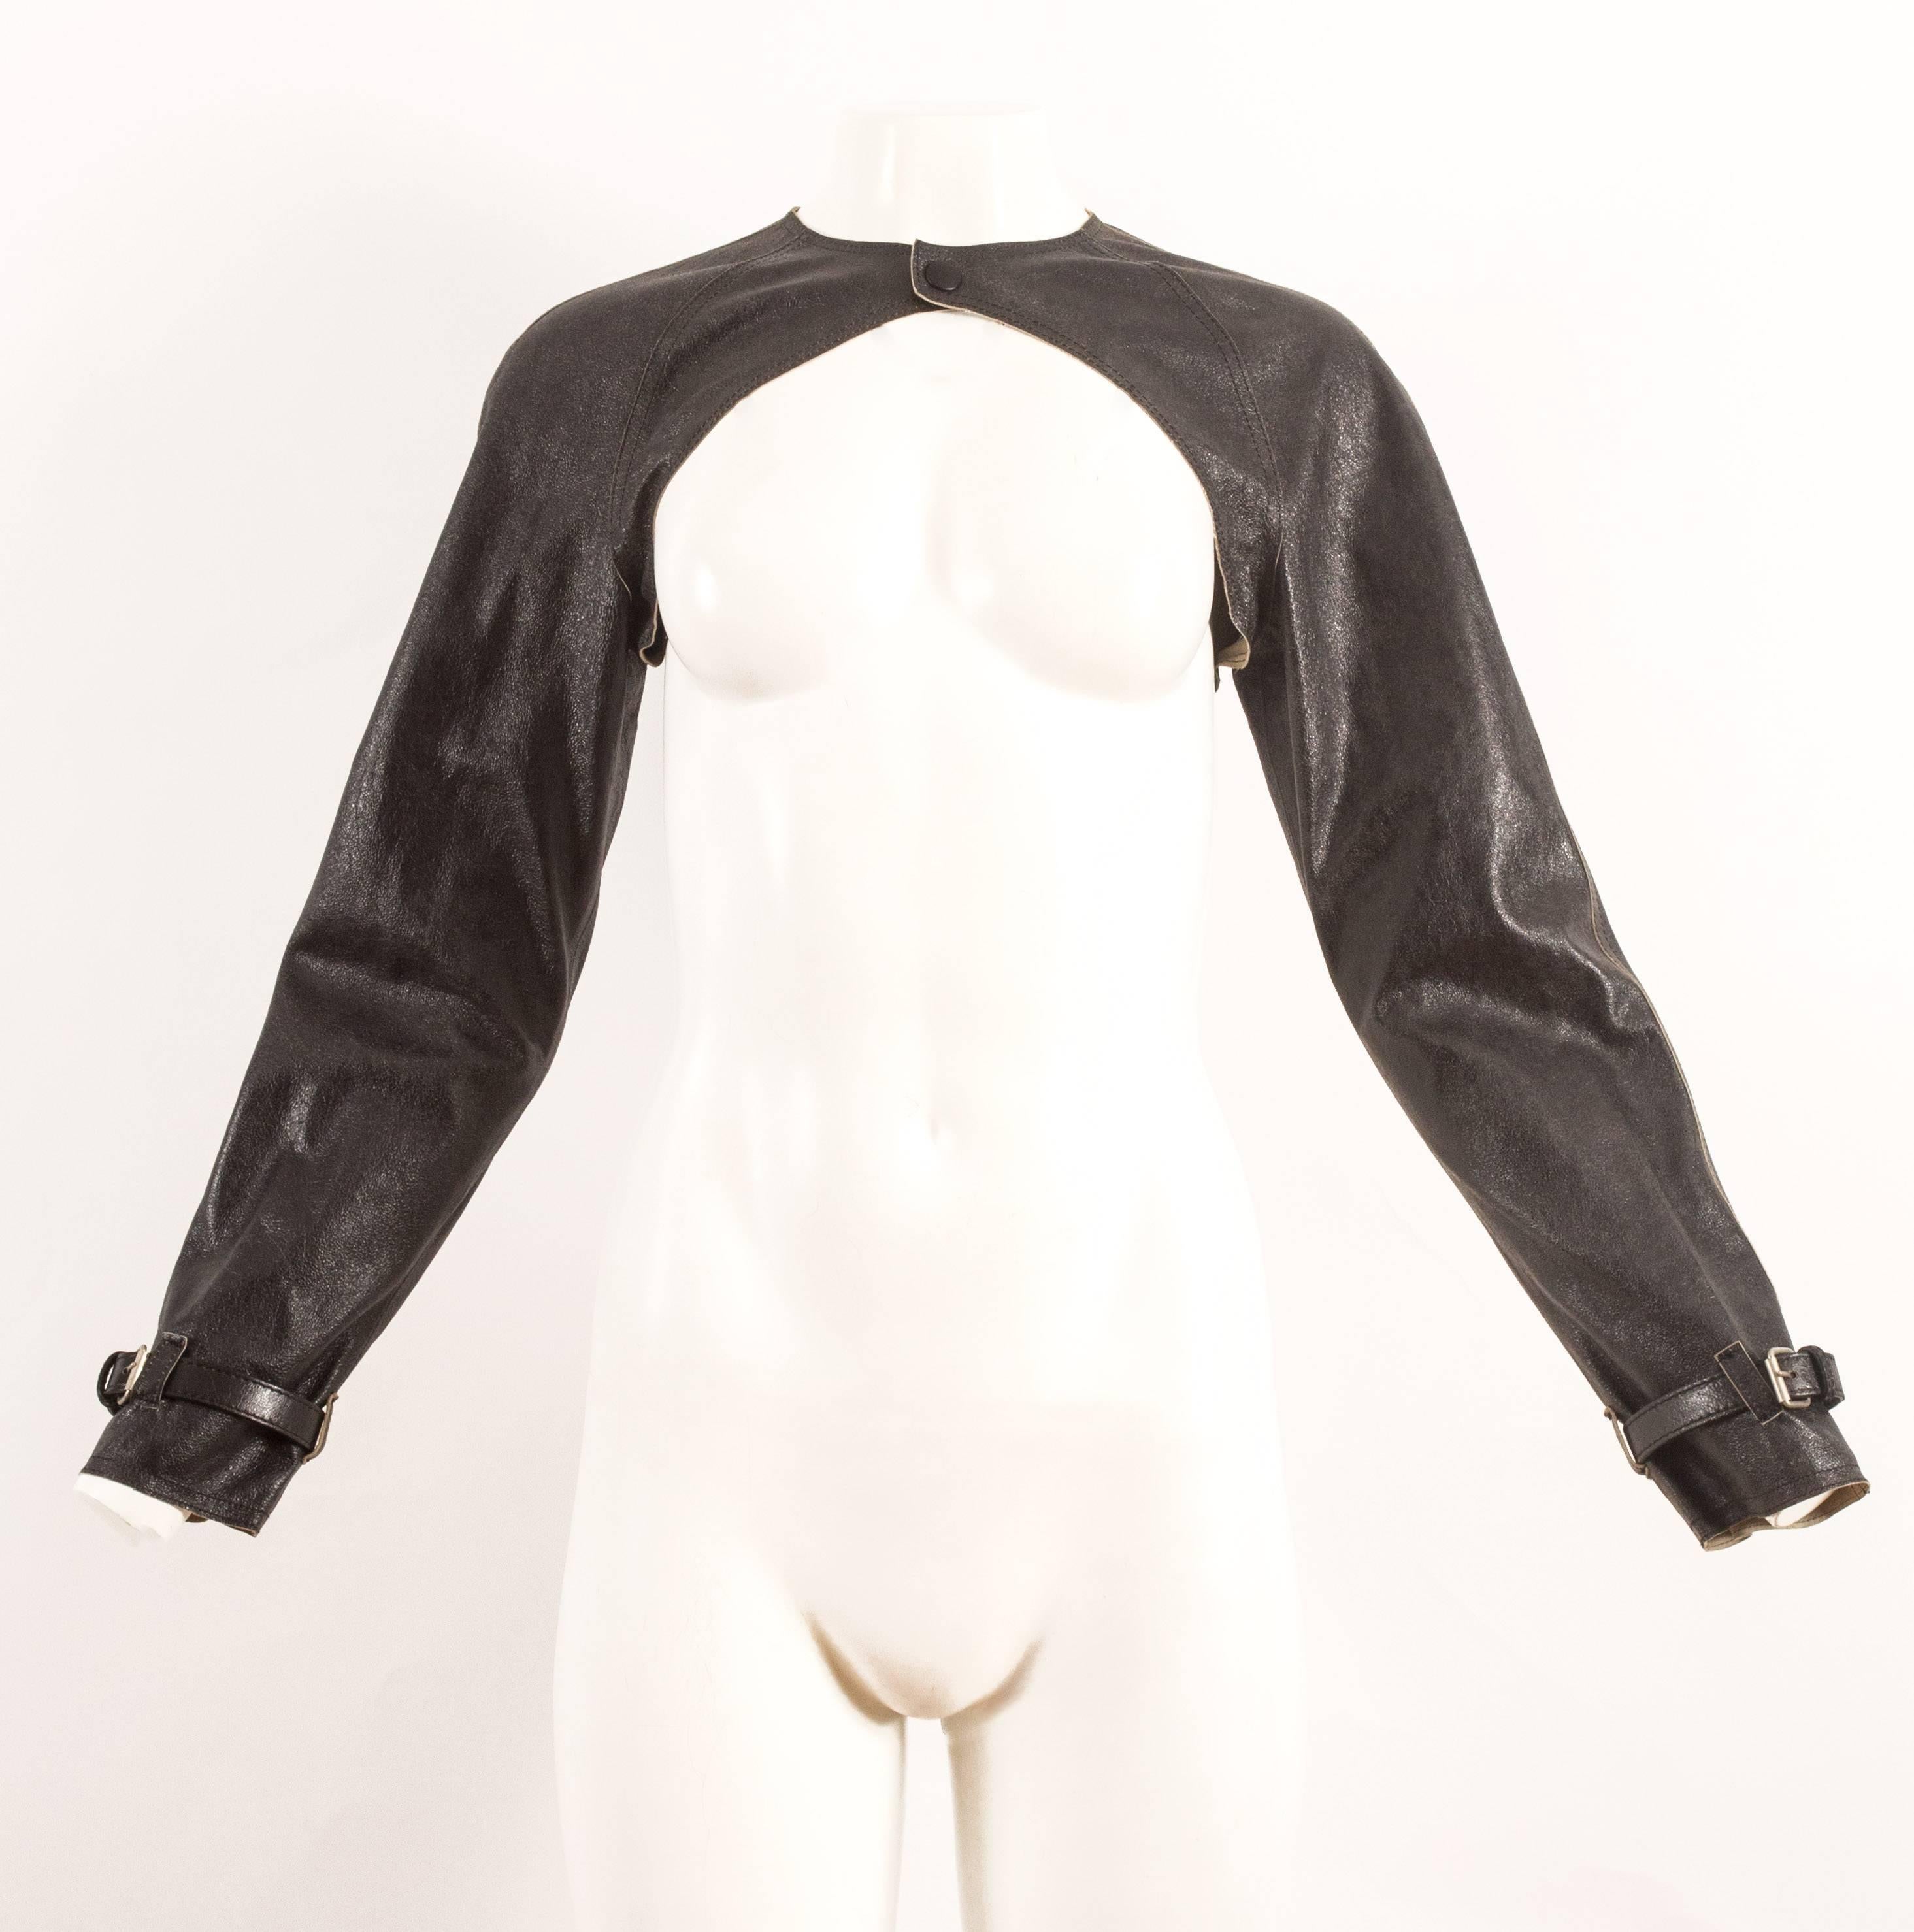 Jean Paul Gaultier Autumn-Winter 2001 cropped leather jacket with snap button closure.